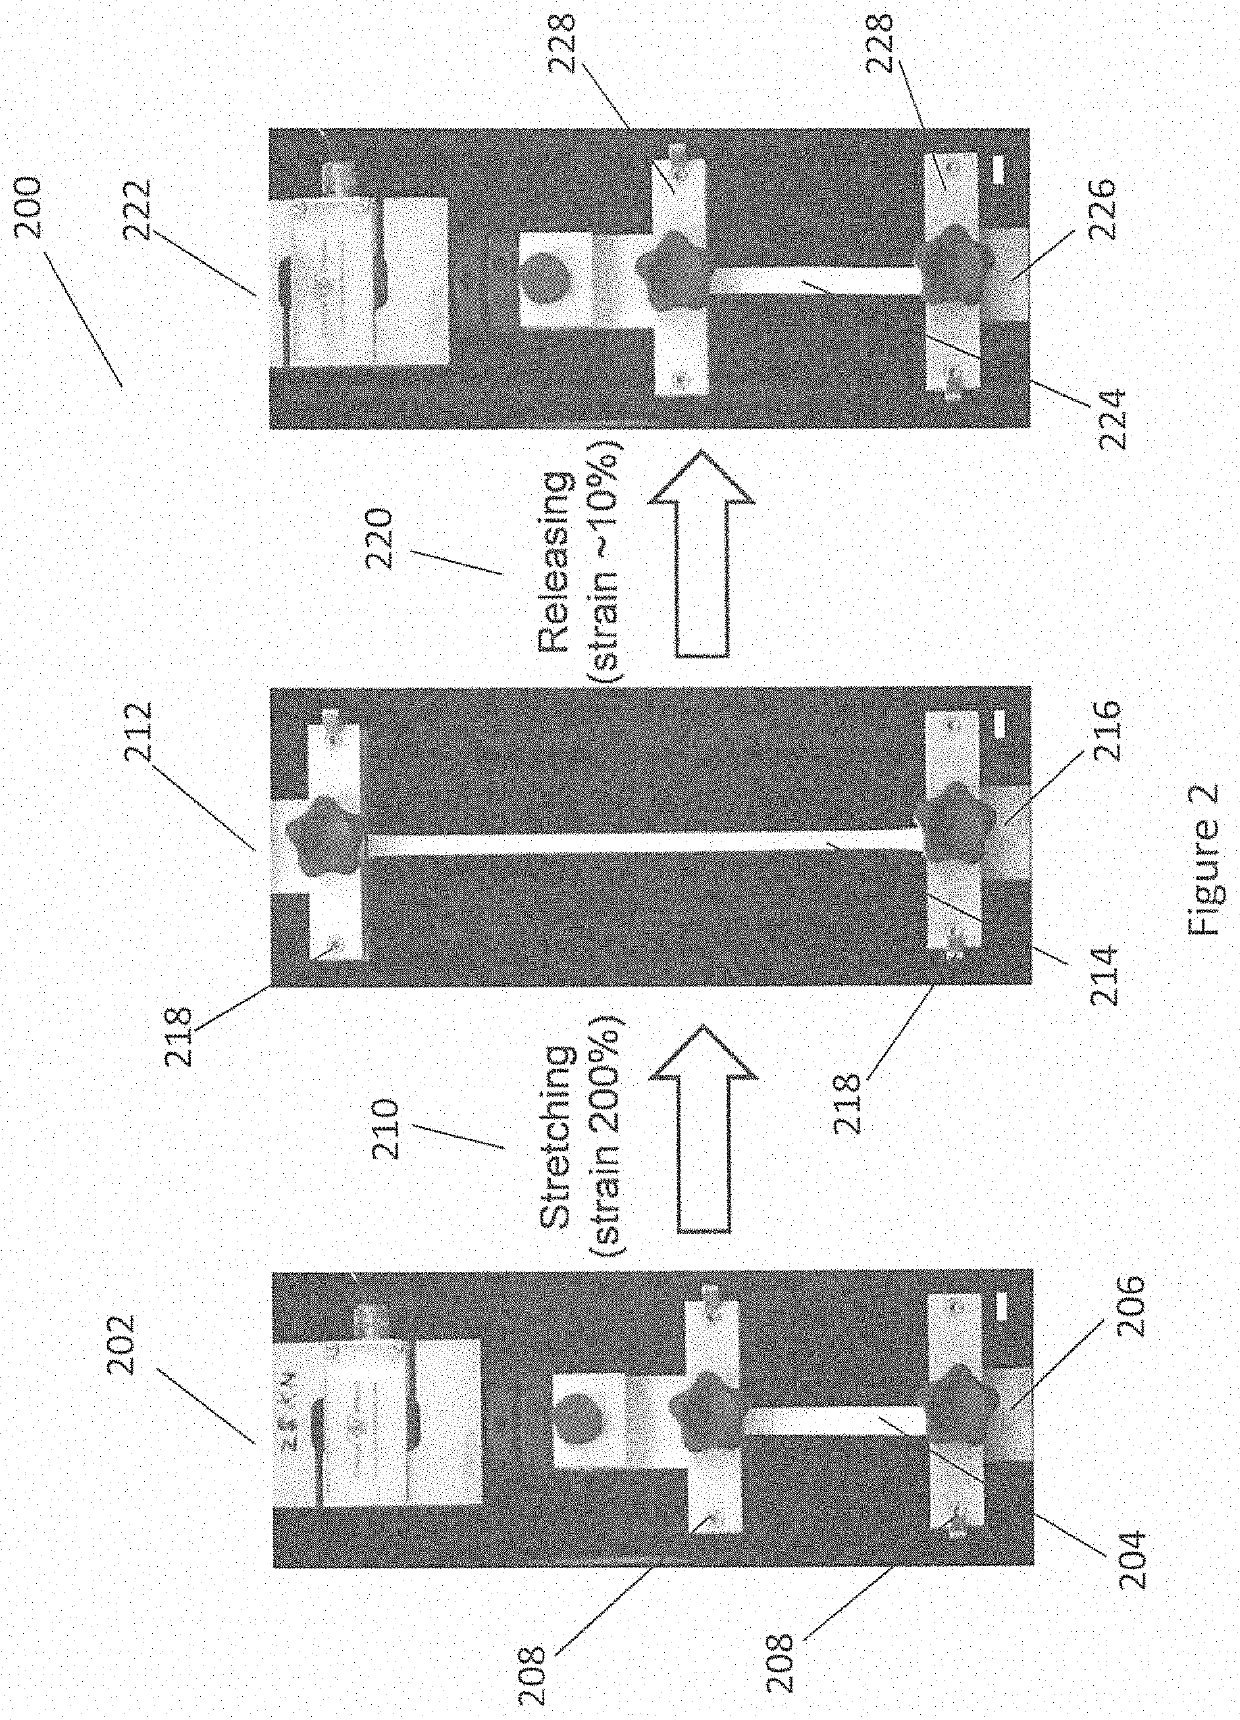 Systems and method for four-dimensional printing of elastomer-derived ceramic structures by compressive buckling-induced method